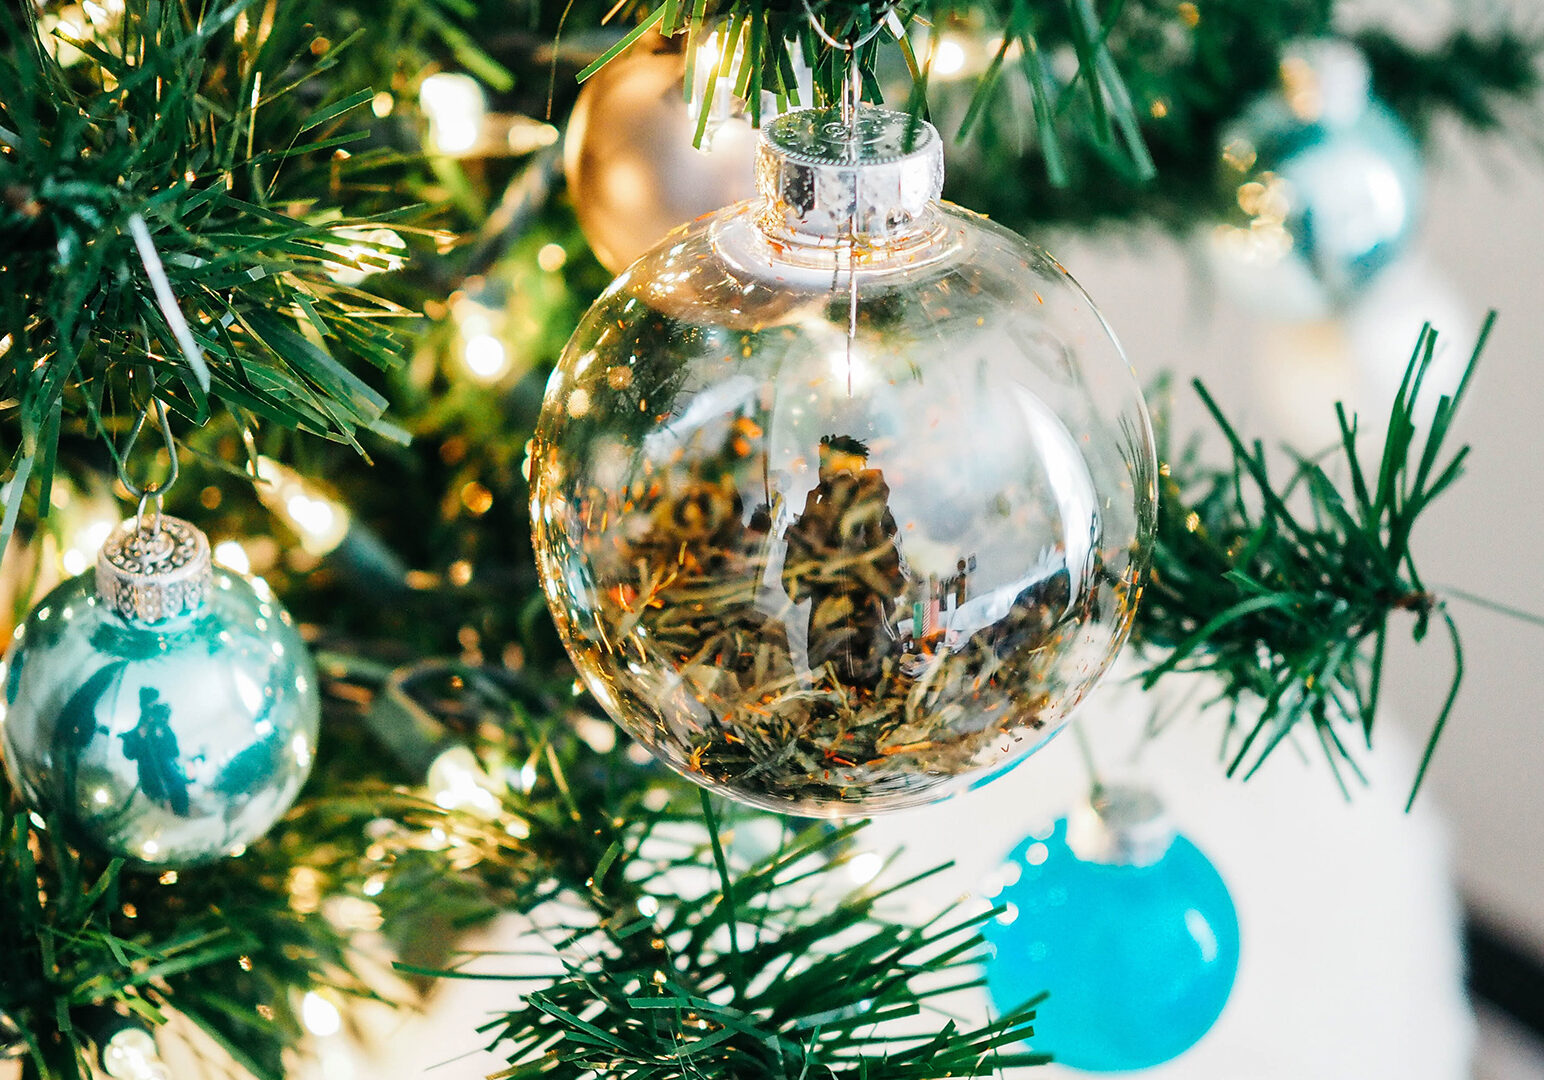 clear-and-teal-glass-baubles-hanged-on-lighted-Christmas-tree